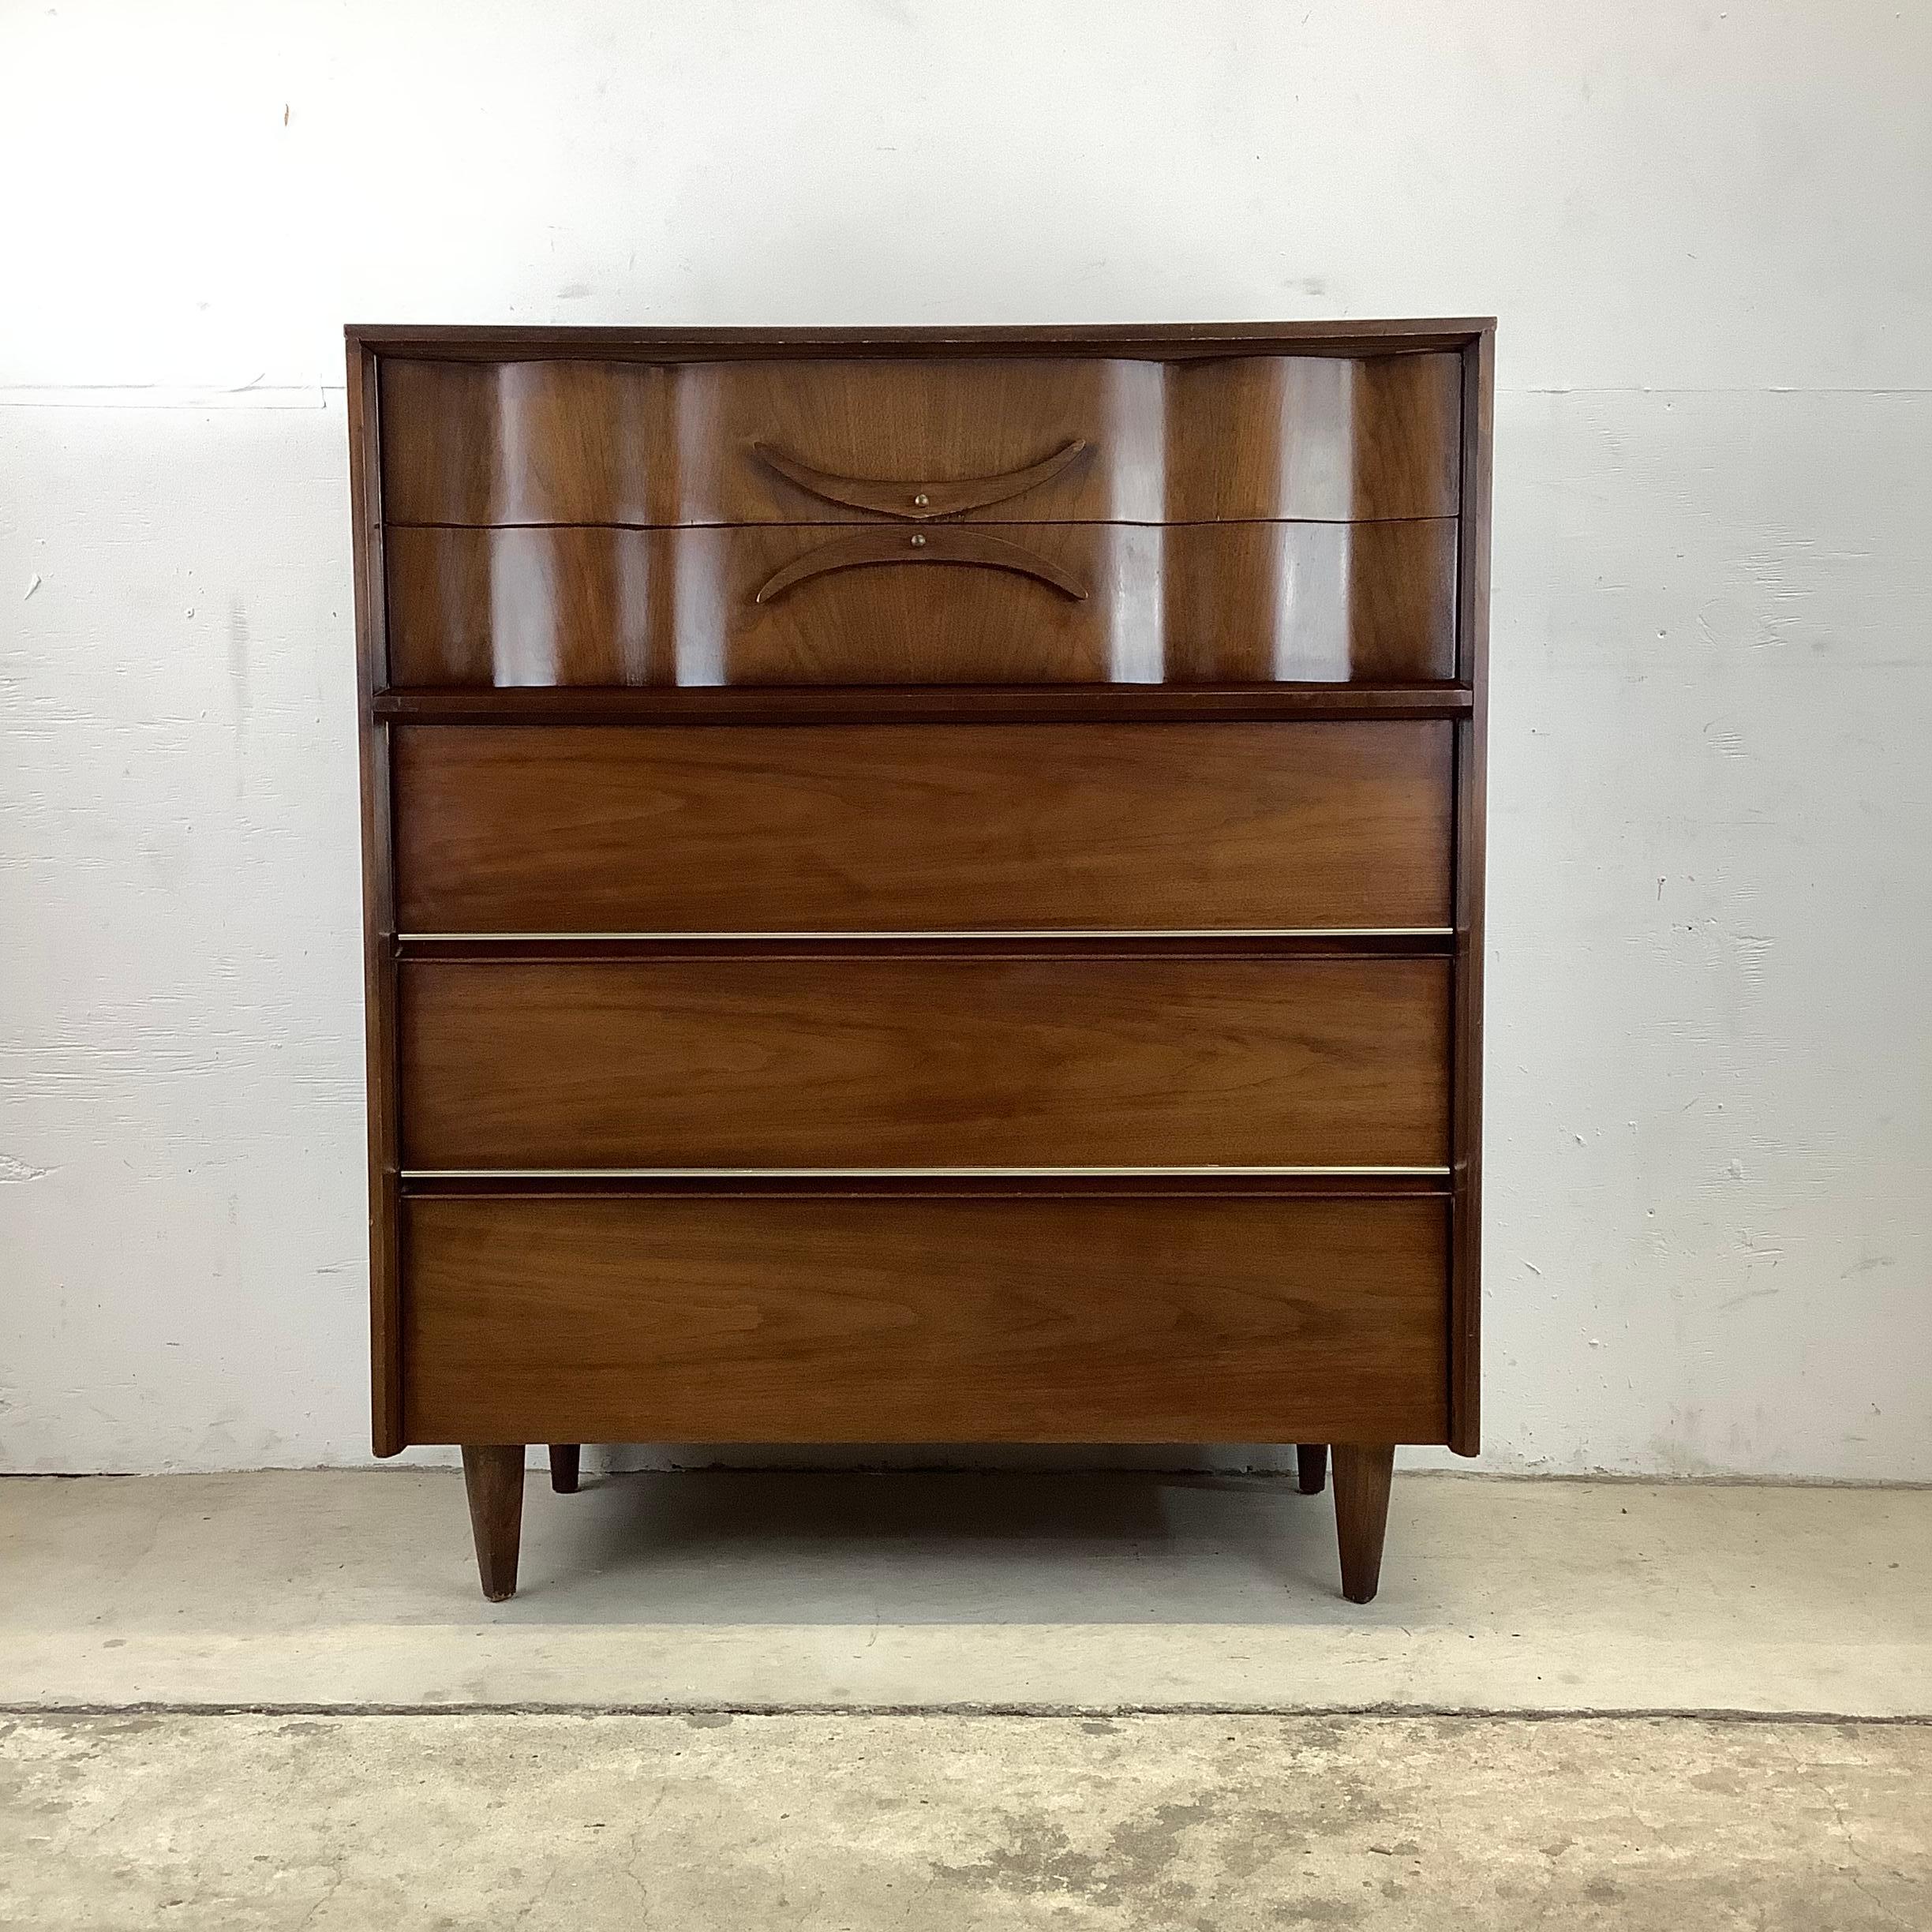 This stylish highboy dresser features the perfect mix of Mid-Century Modern style, vintage walnut finish, and spacious drawers for plenty of bedroom storage. Unique sculptural wooden handles, tapered legs, and clean modern lines add to the charm of